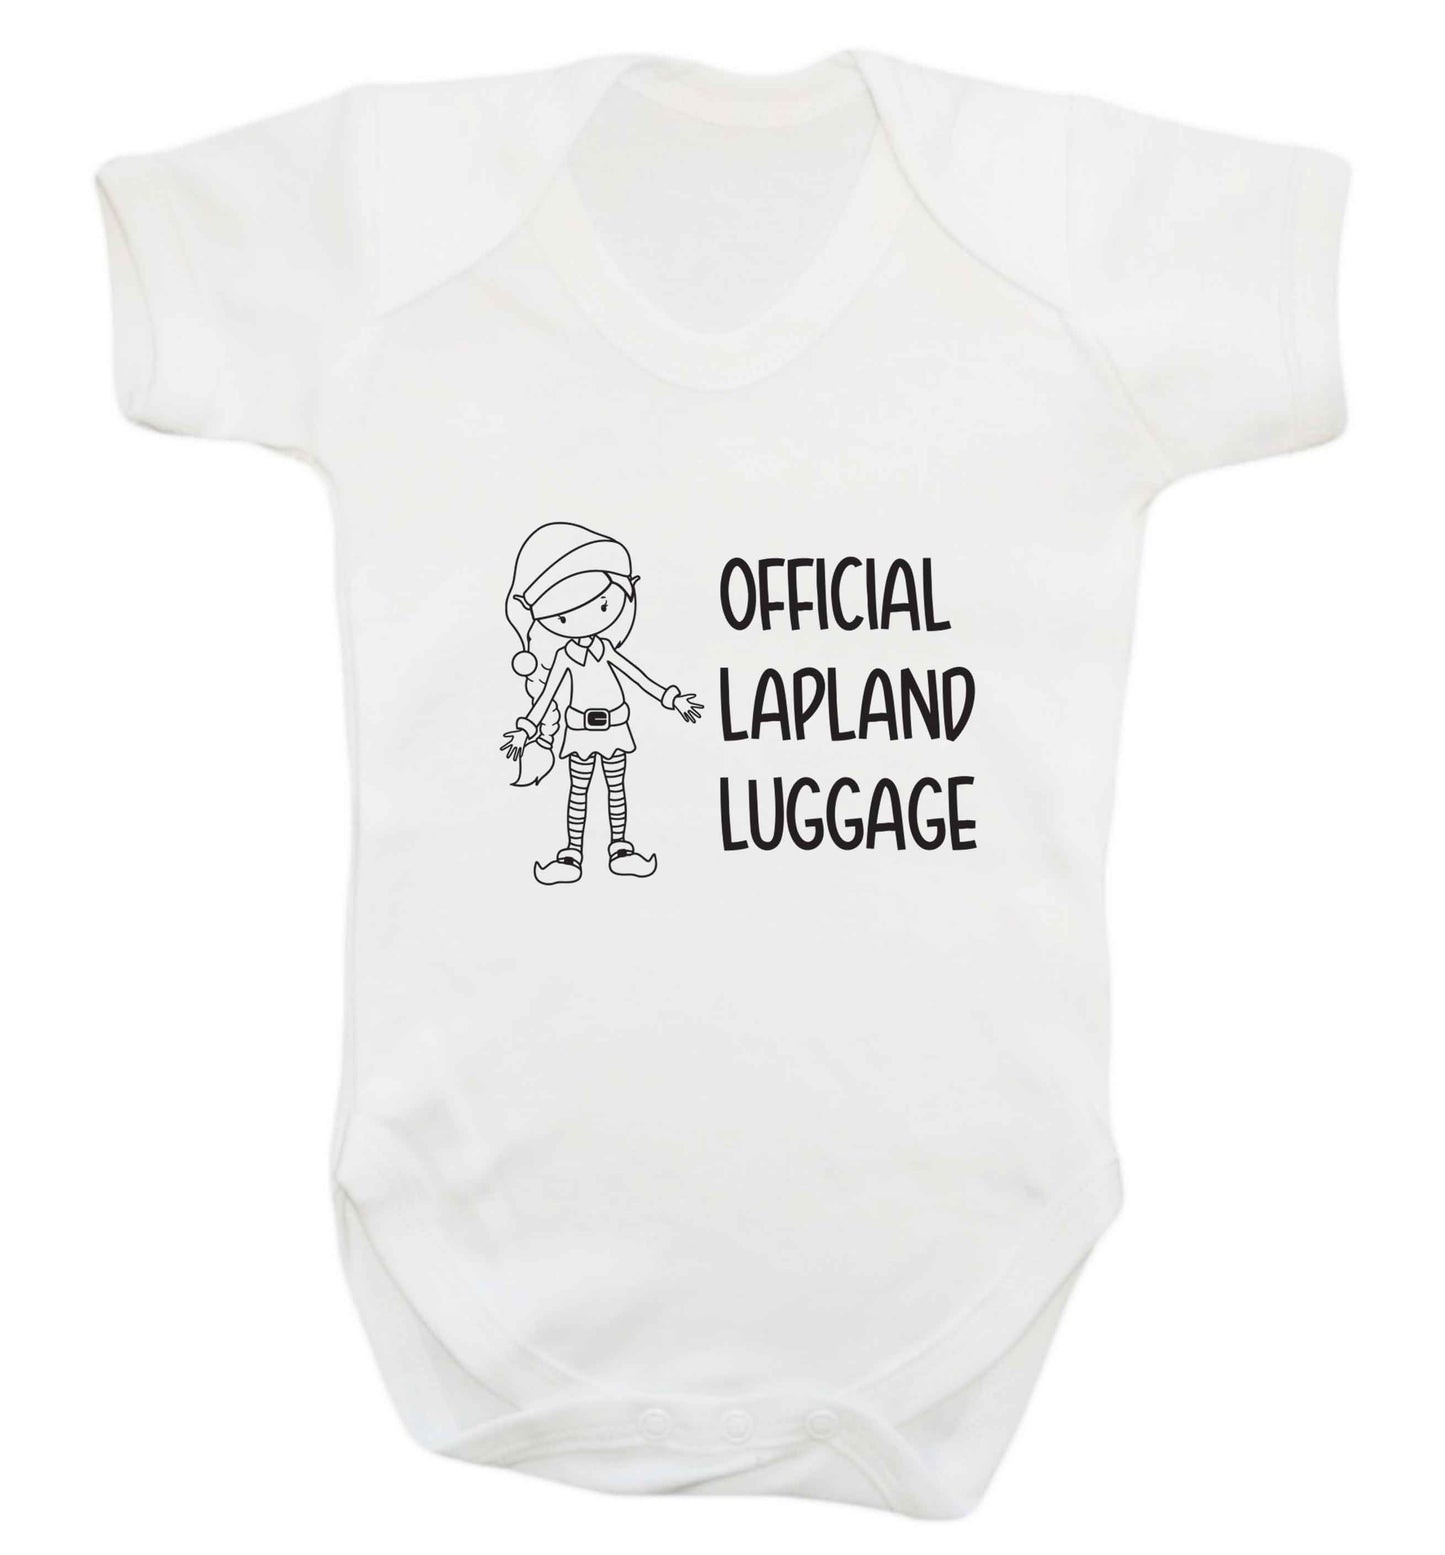 Official lapland luggage - Elf snowflake baby vest white 18-24 months